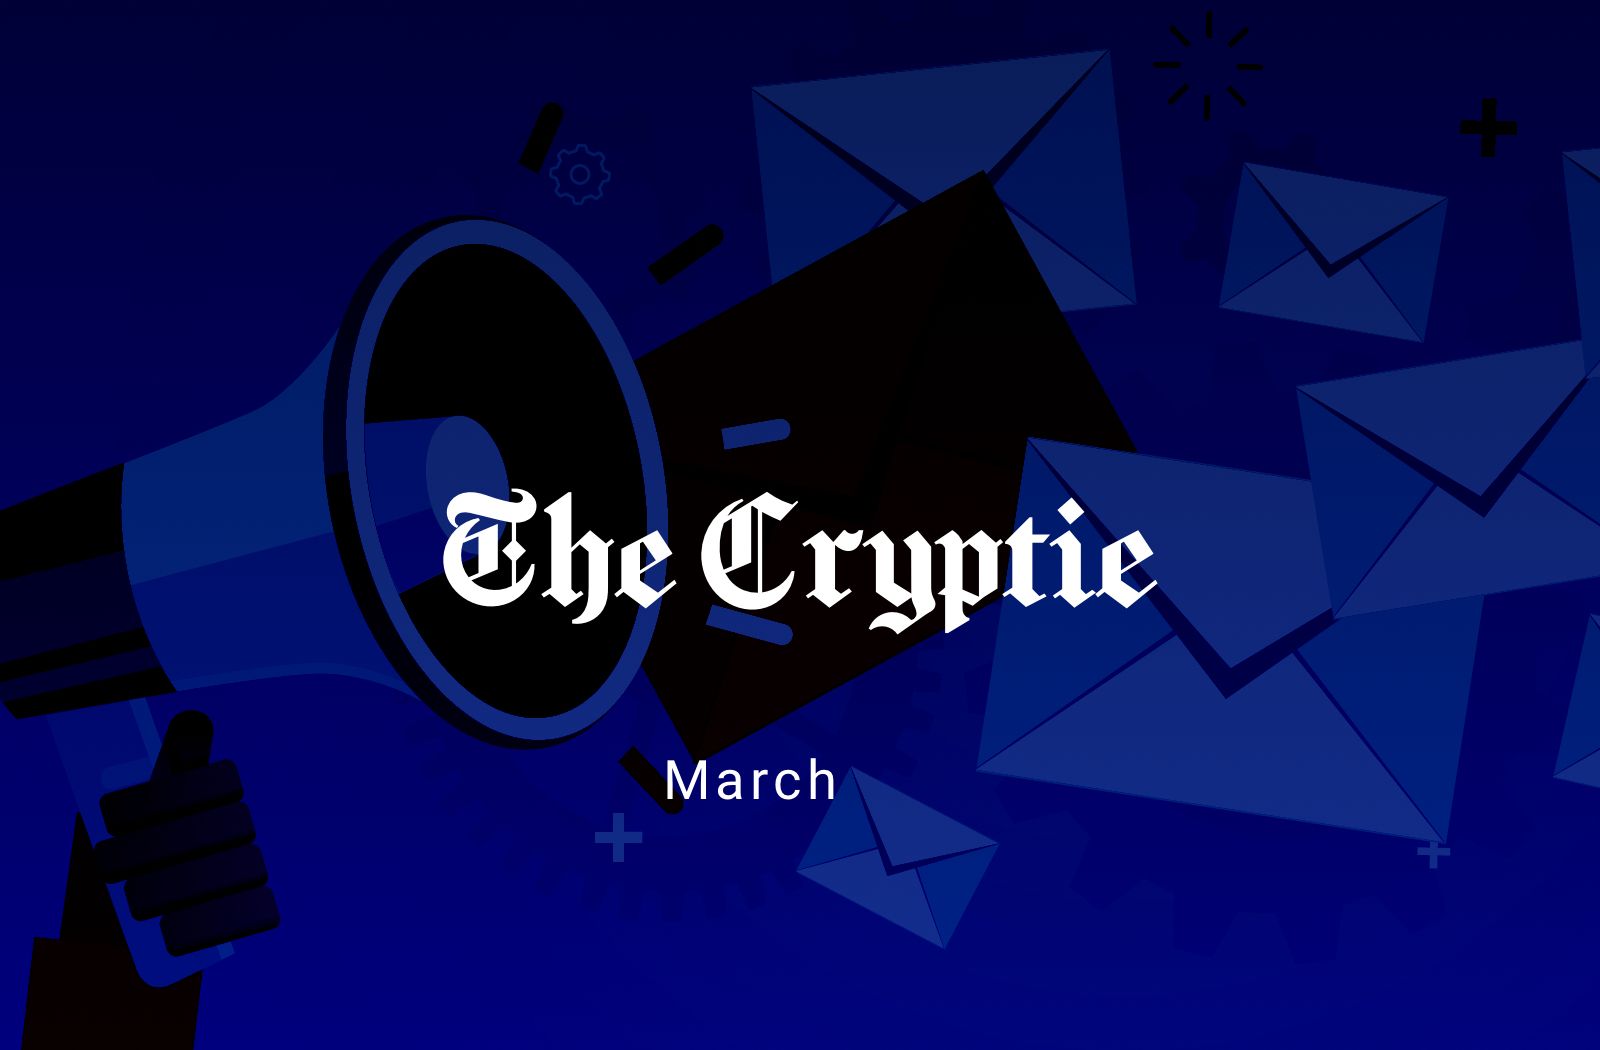 Your March Newsletter for All Things BitPay and Crypto